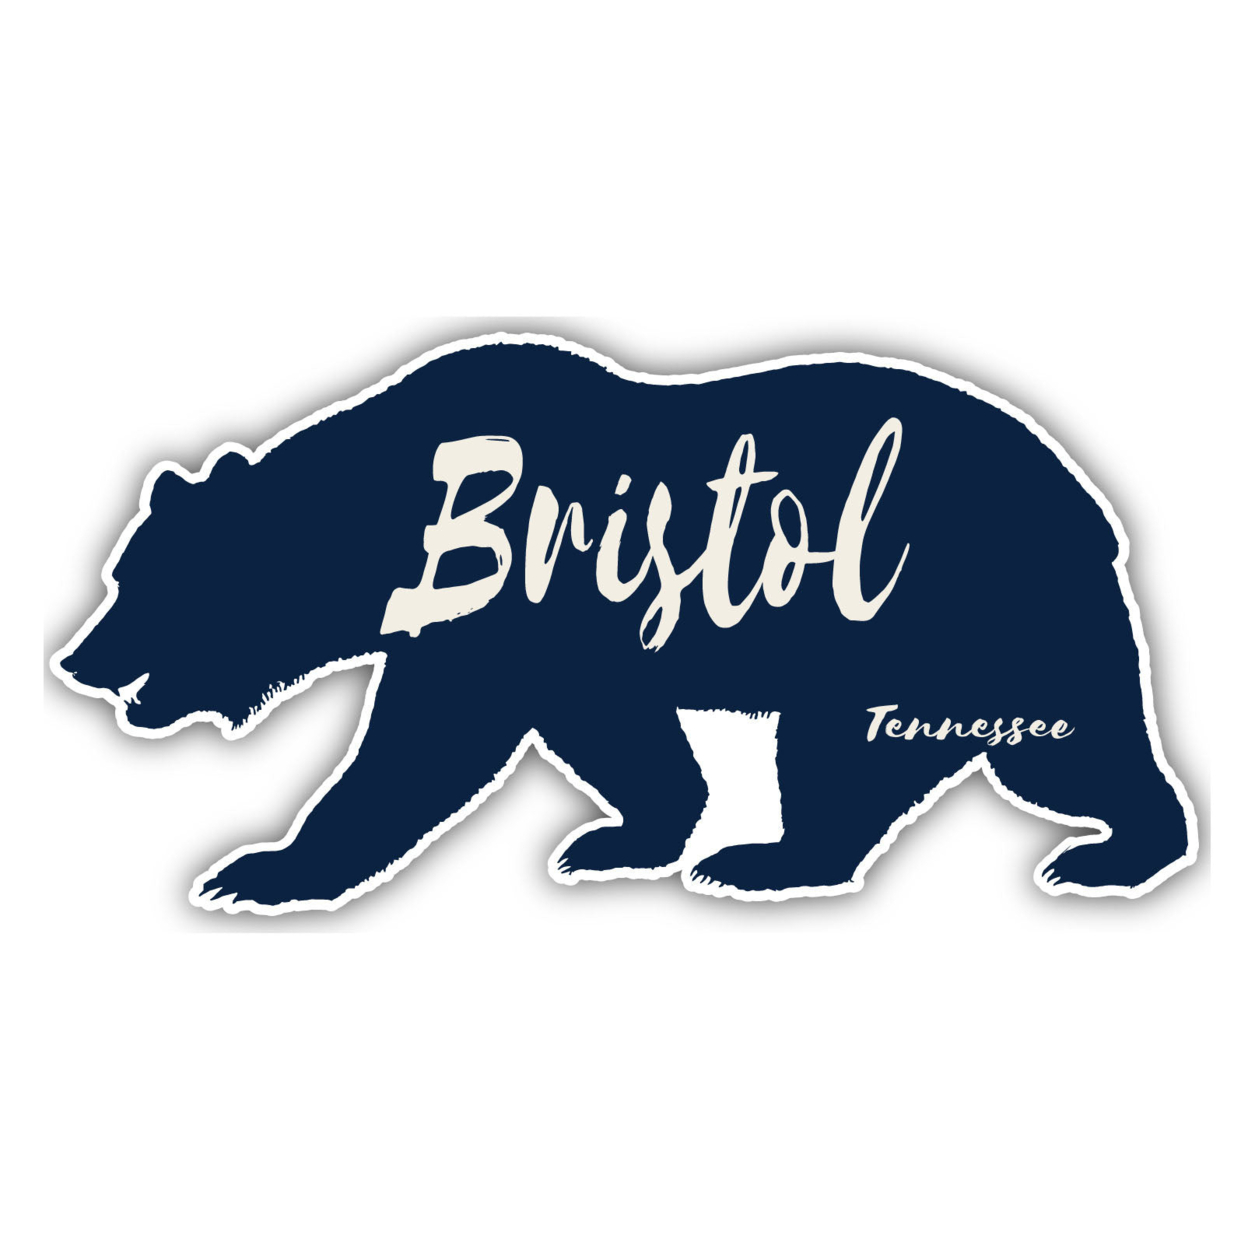 Bristol Tennessee Souvenir Decorative Stickers (Choose Theme And Size) - 4-Pack, 2-Inch, Tent